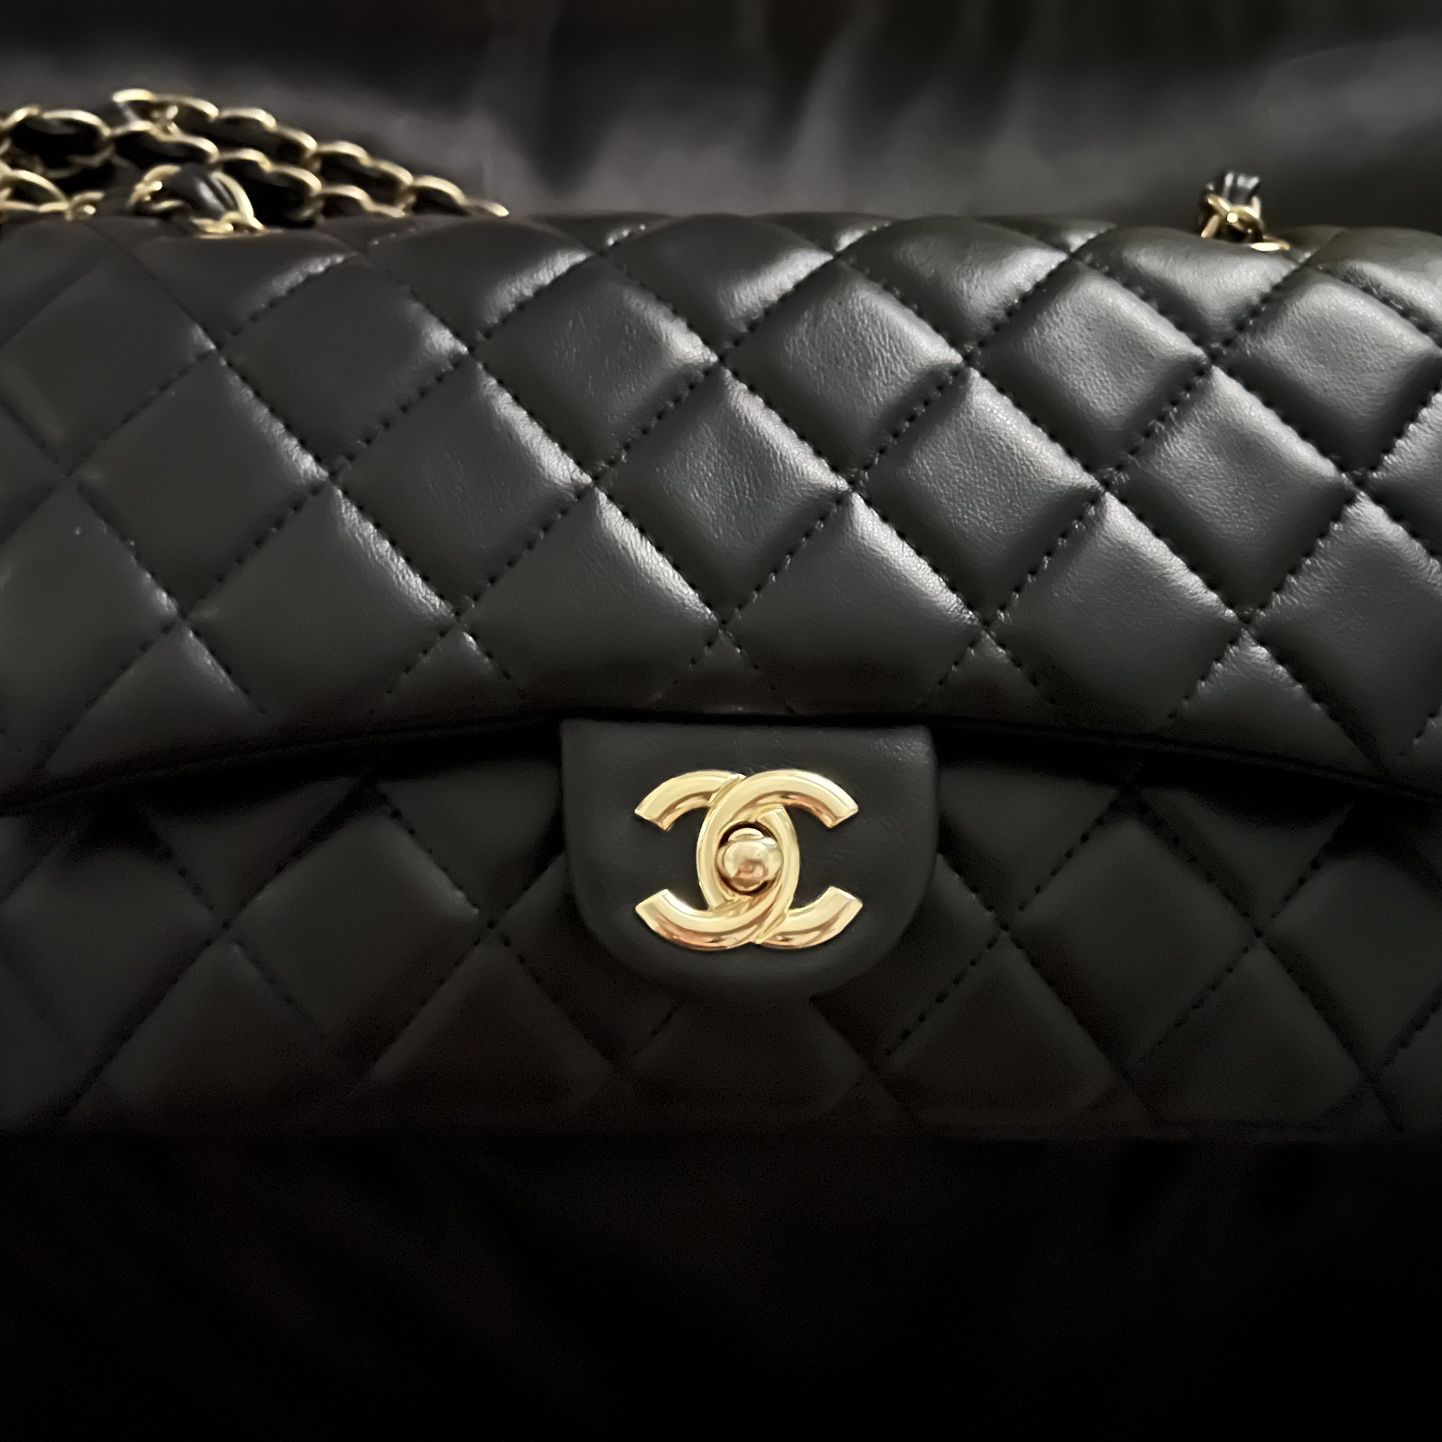 Chanel Full Flap Bag for Sale in Akron, OH - OfferUp